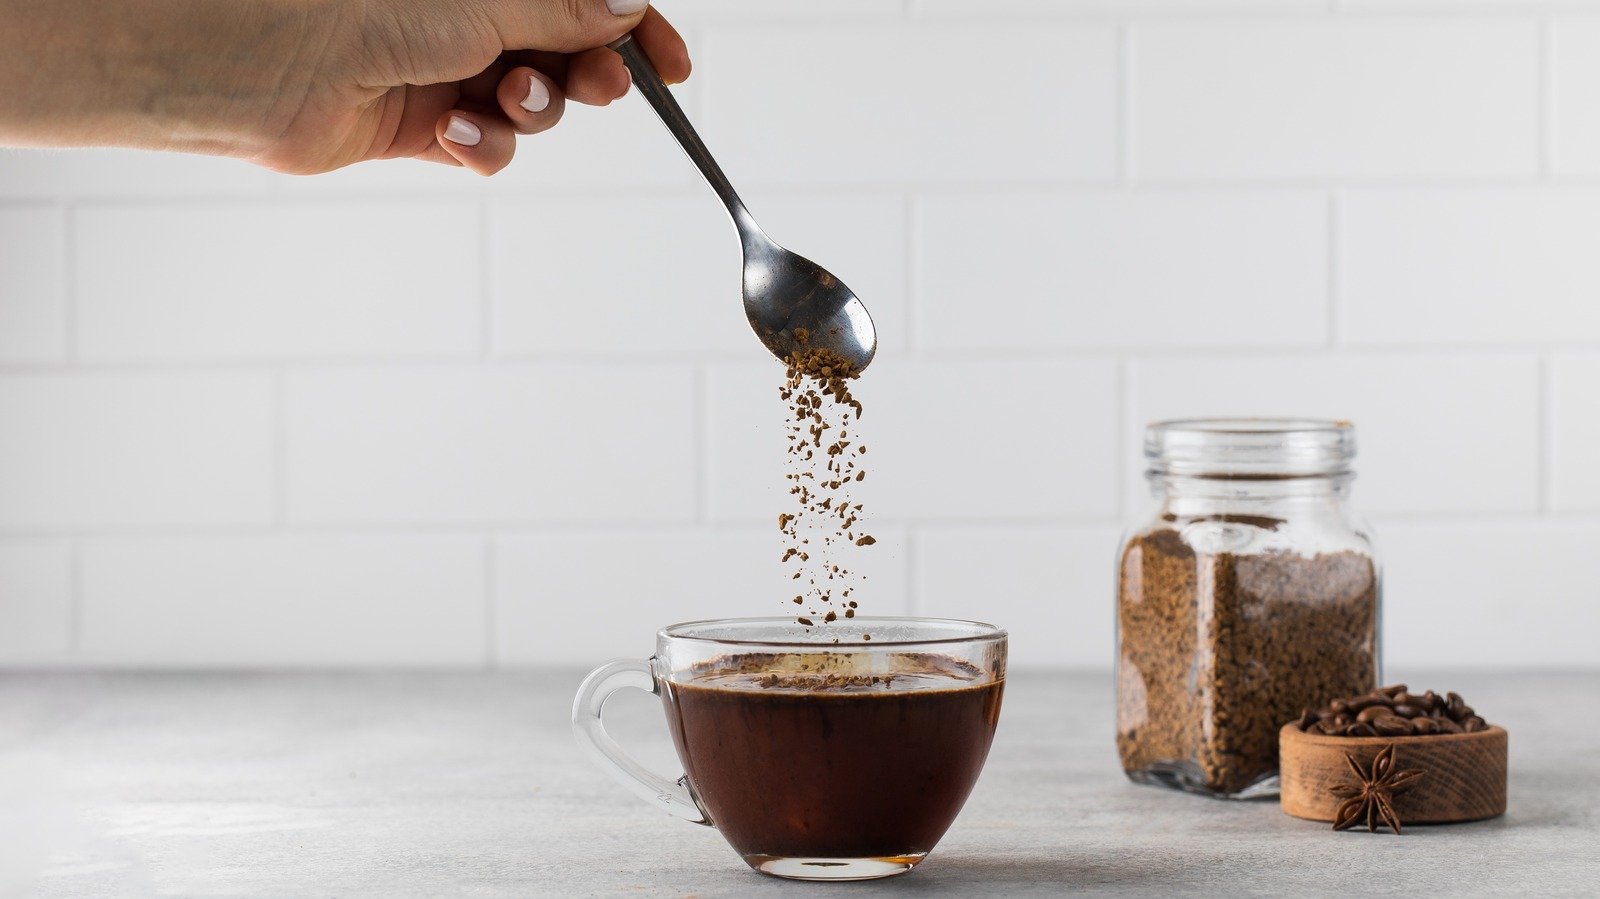 Your Instant Coffee Will Taste Café-Made With One Simple Swap